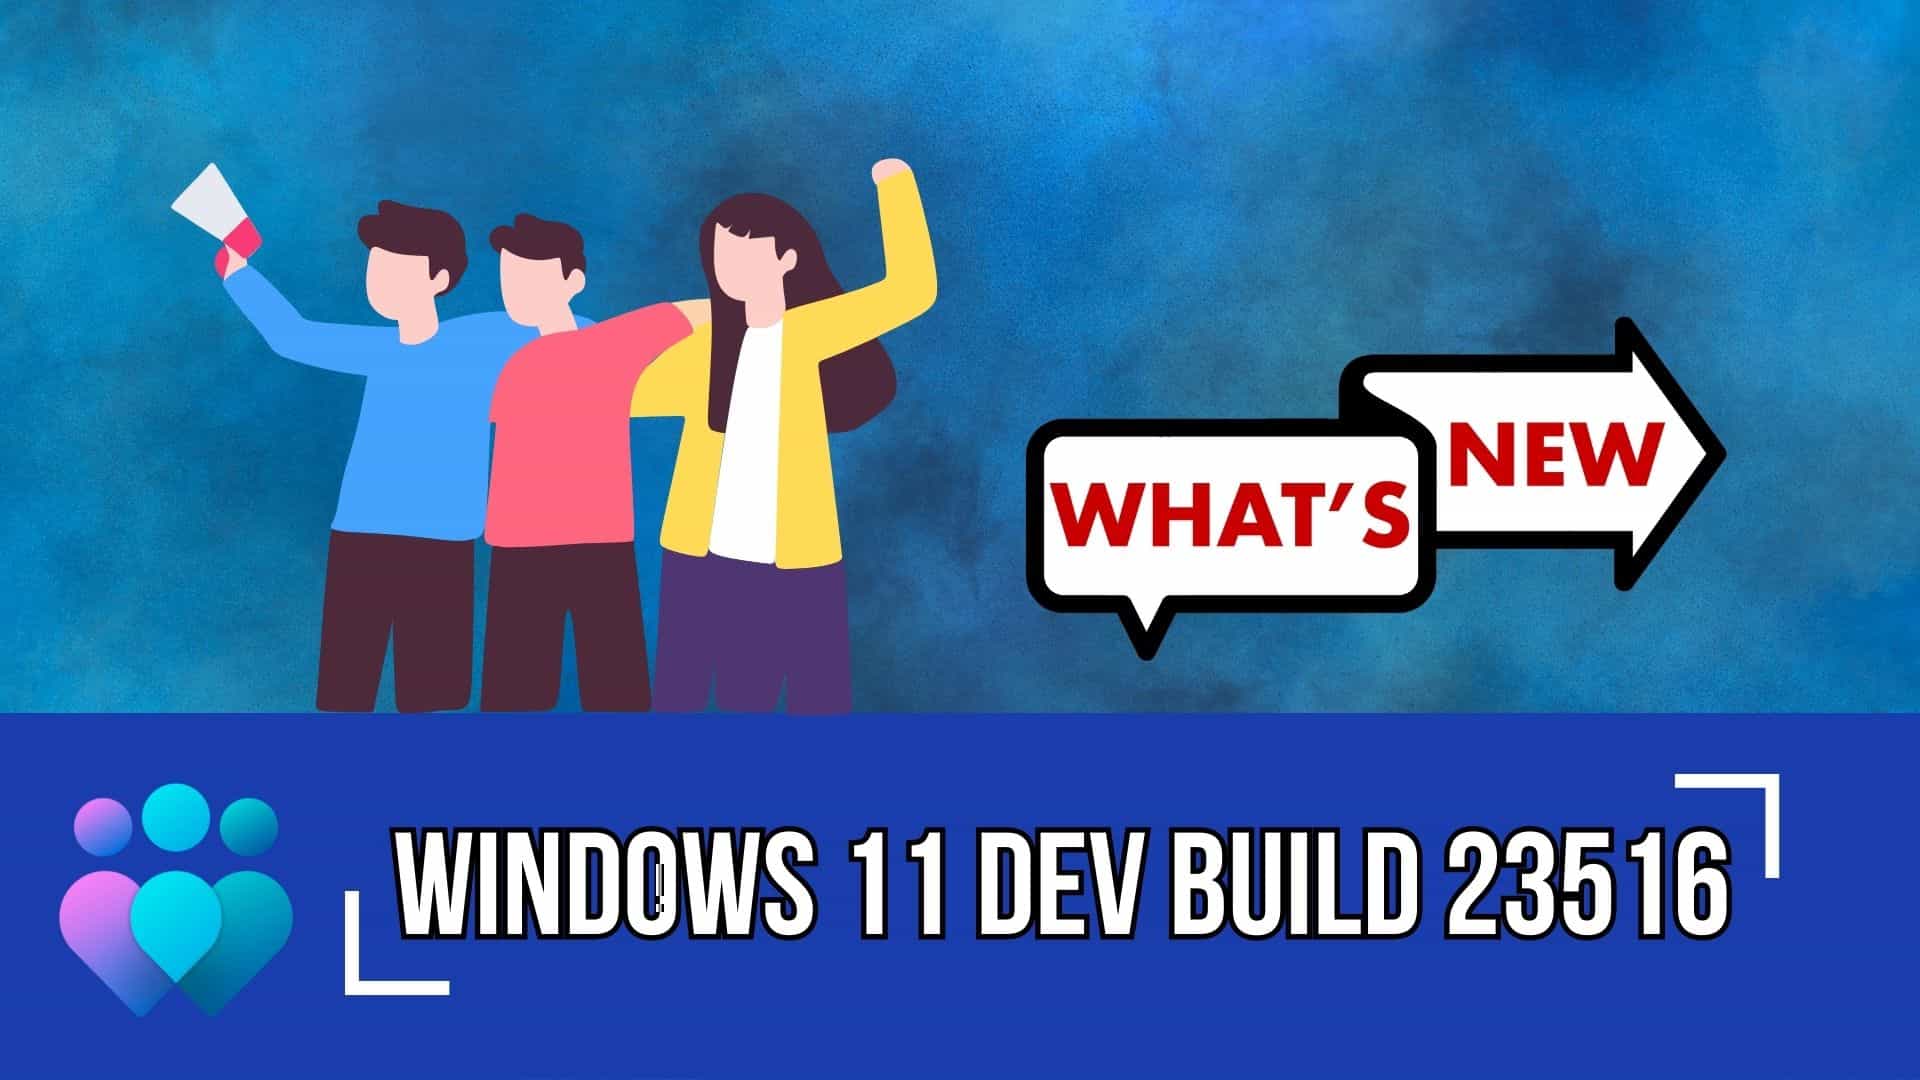 What's new and improved in Windows 11 Build 23516?